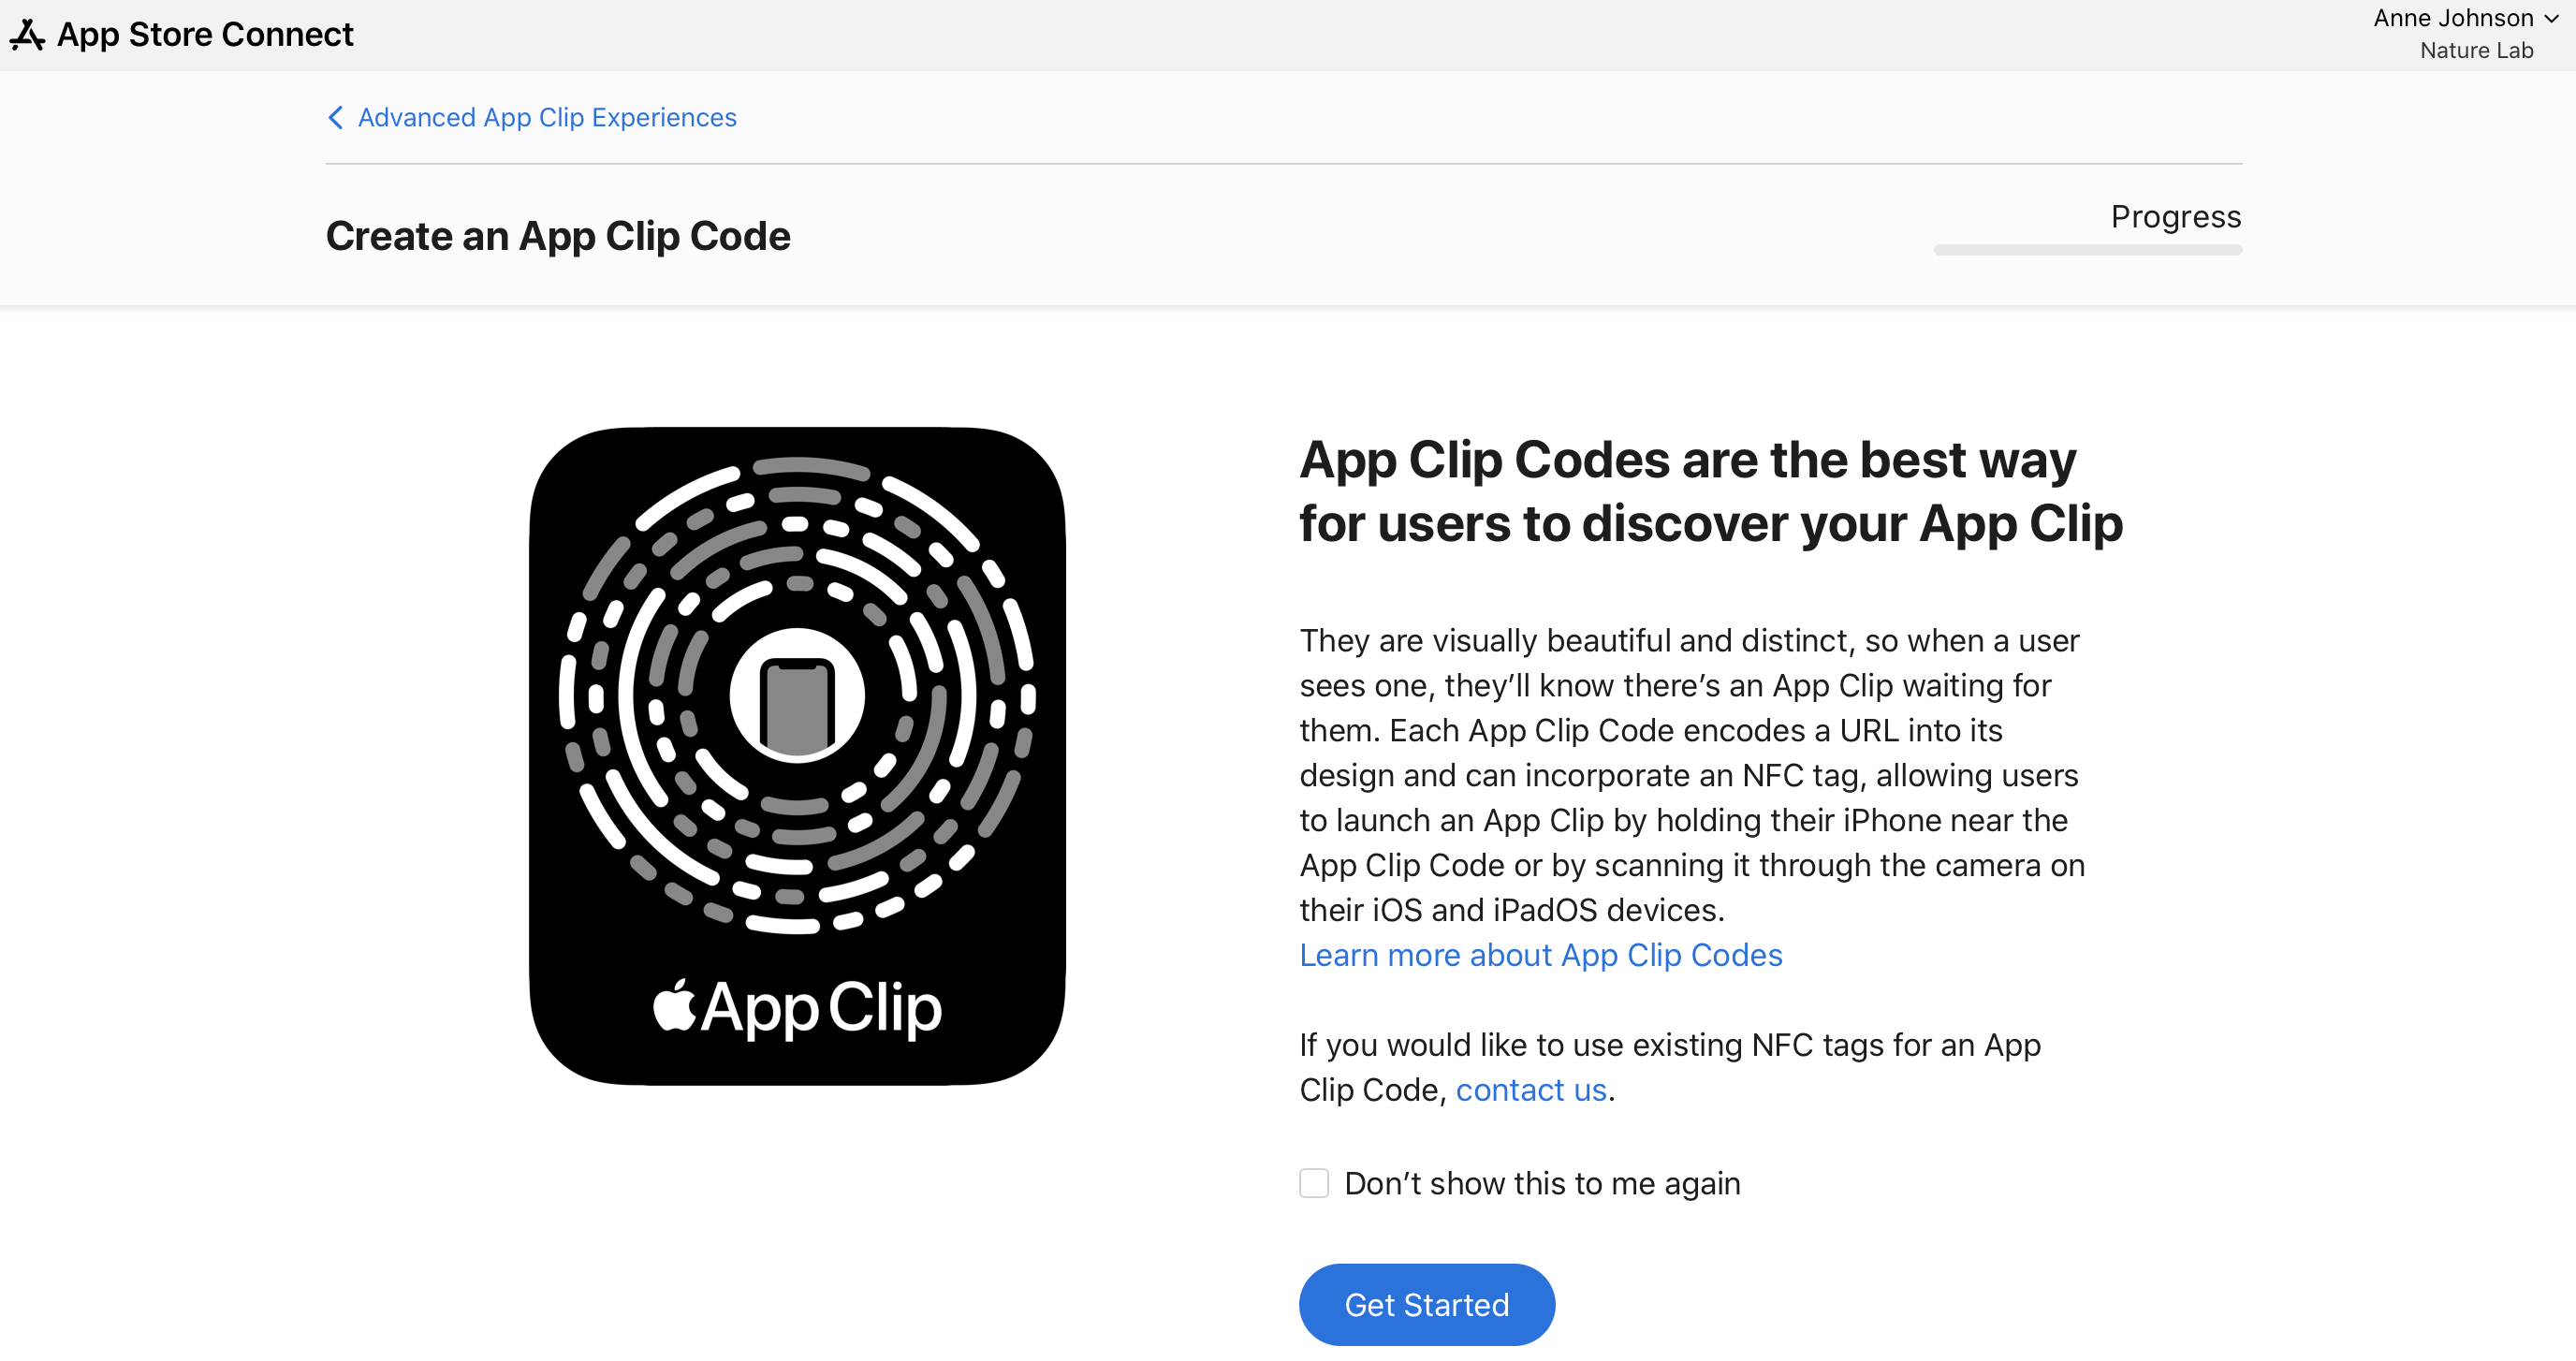 App Clip codes getting started